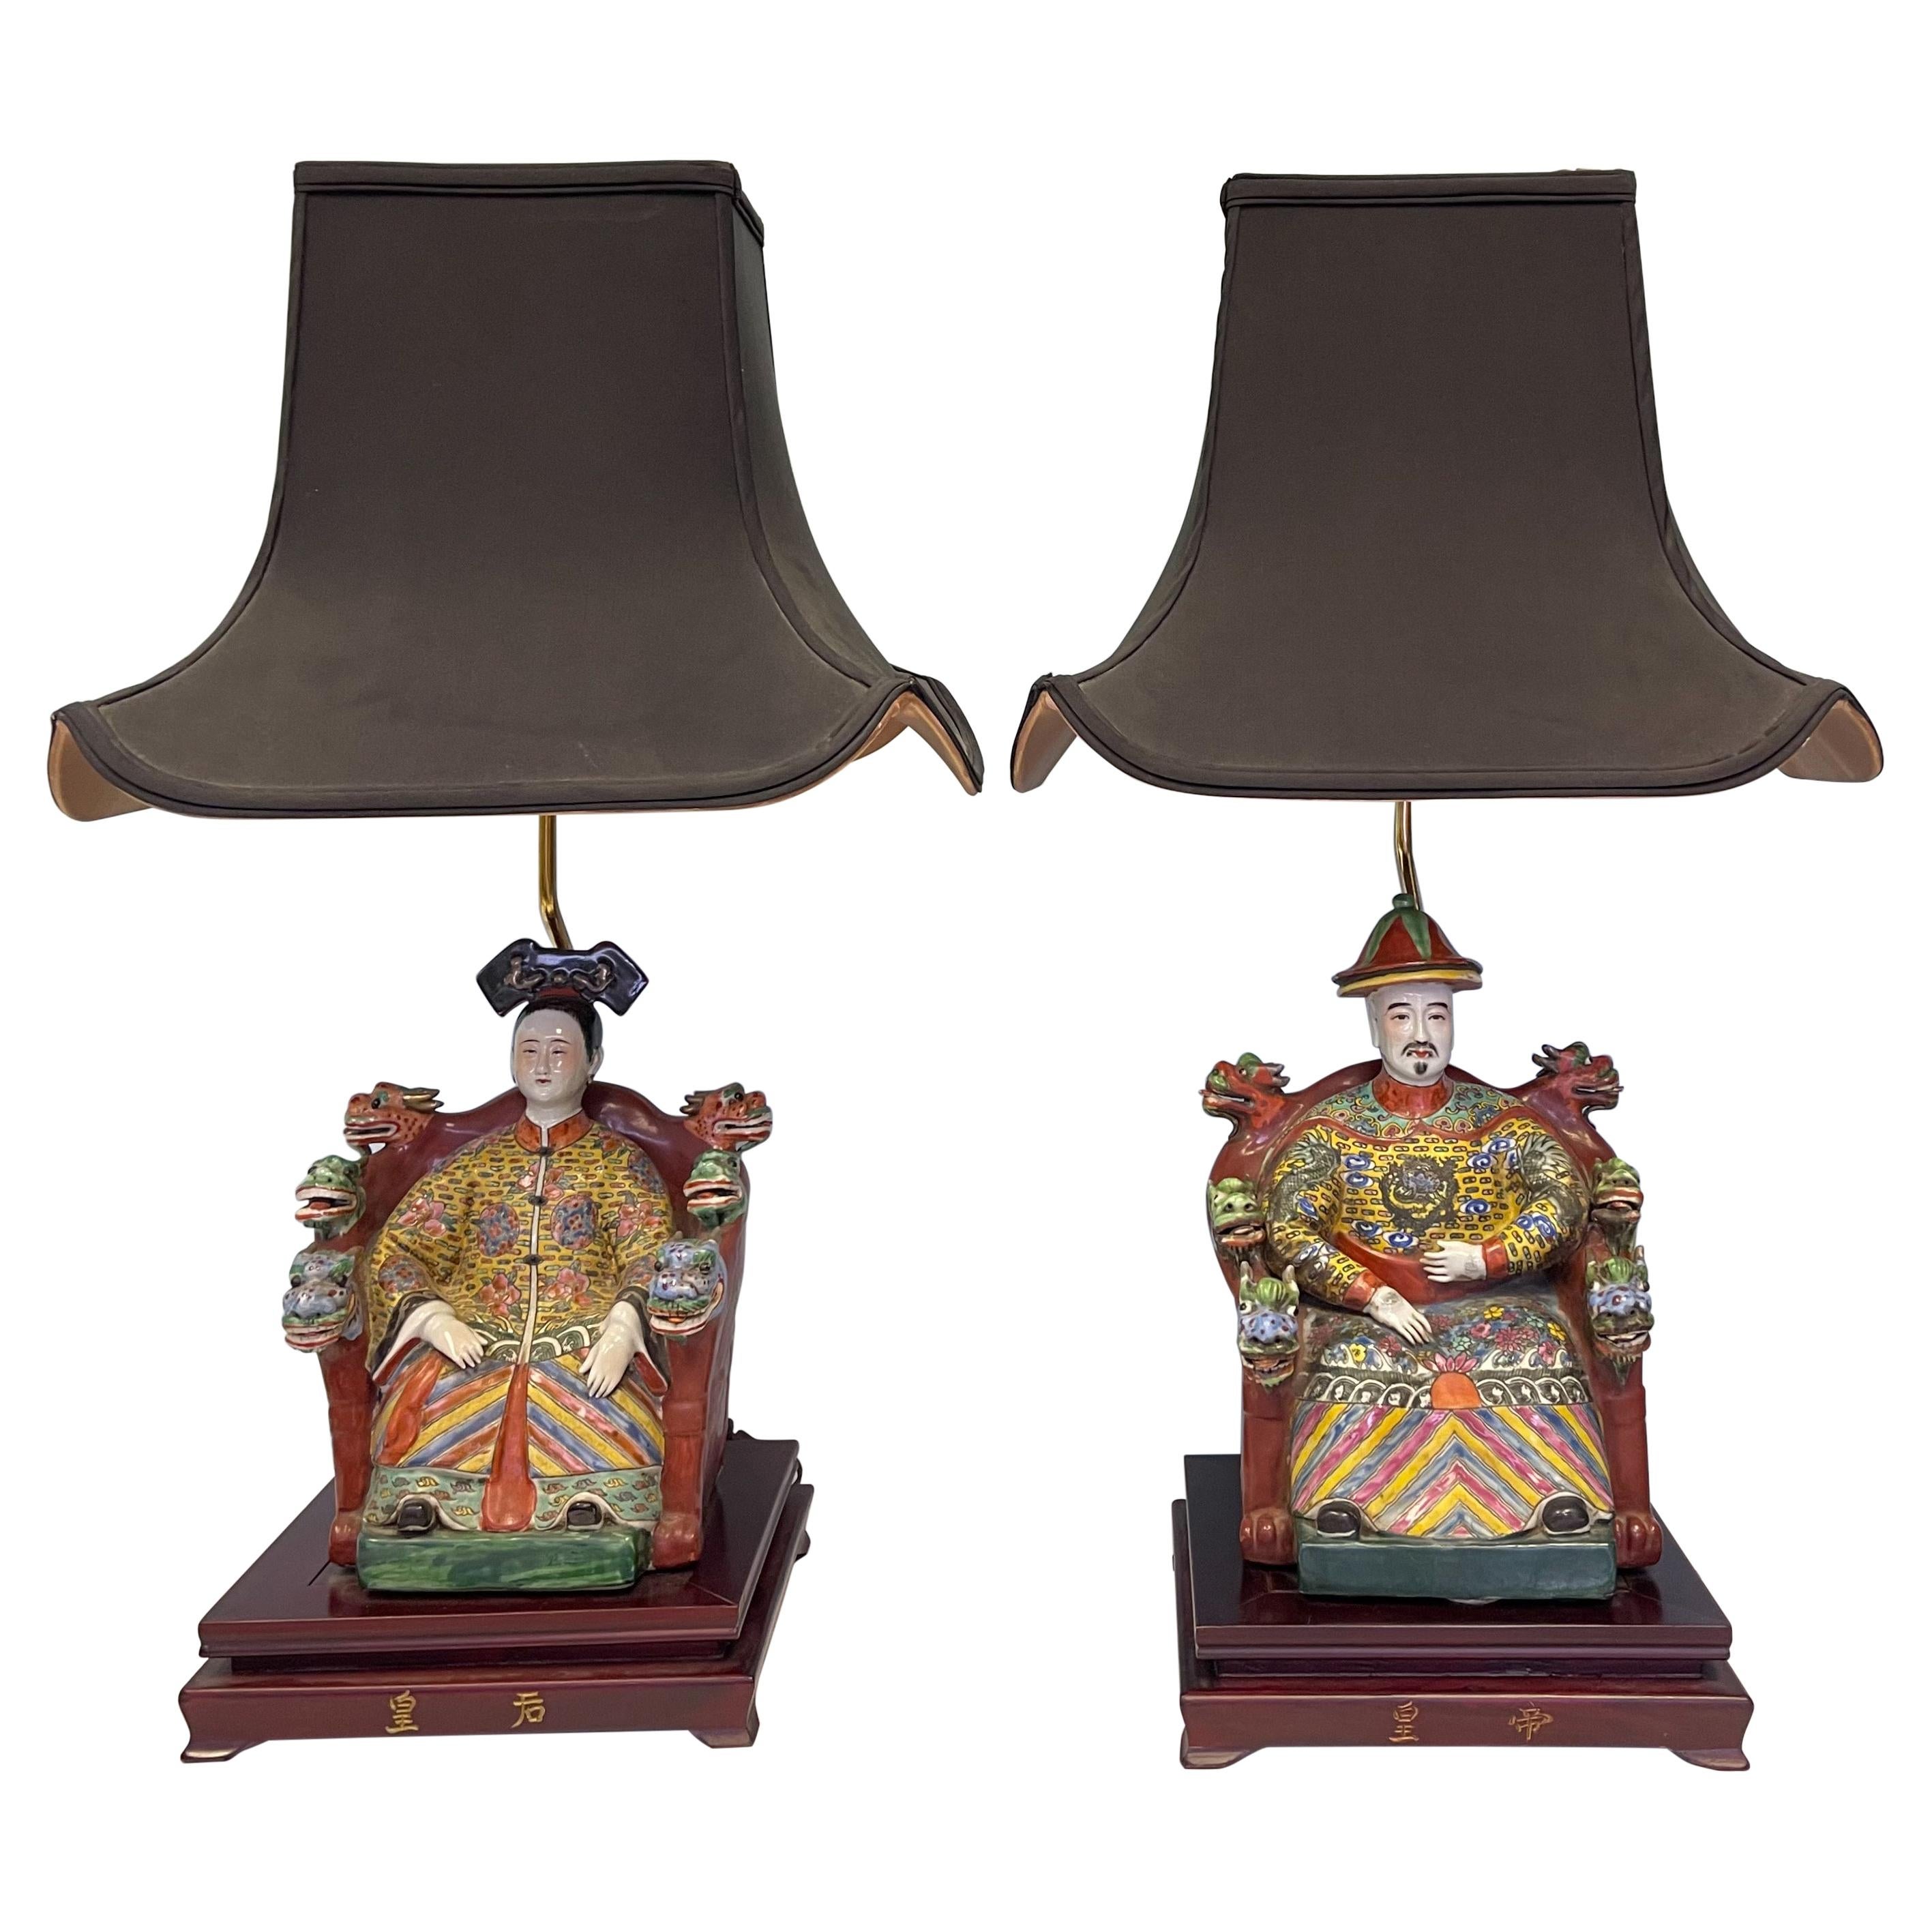 Large Scale Chinoiserie Pottery Lamps with Seated Ancestors and Pagoda Shades